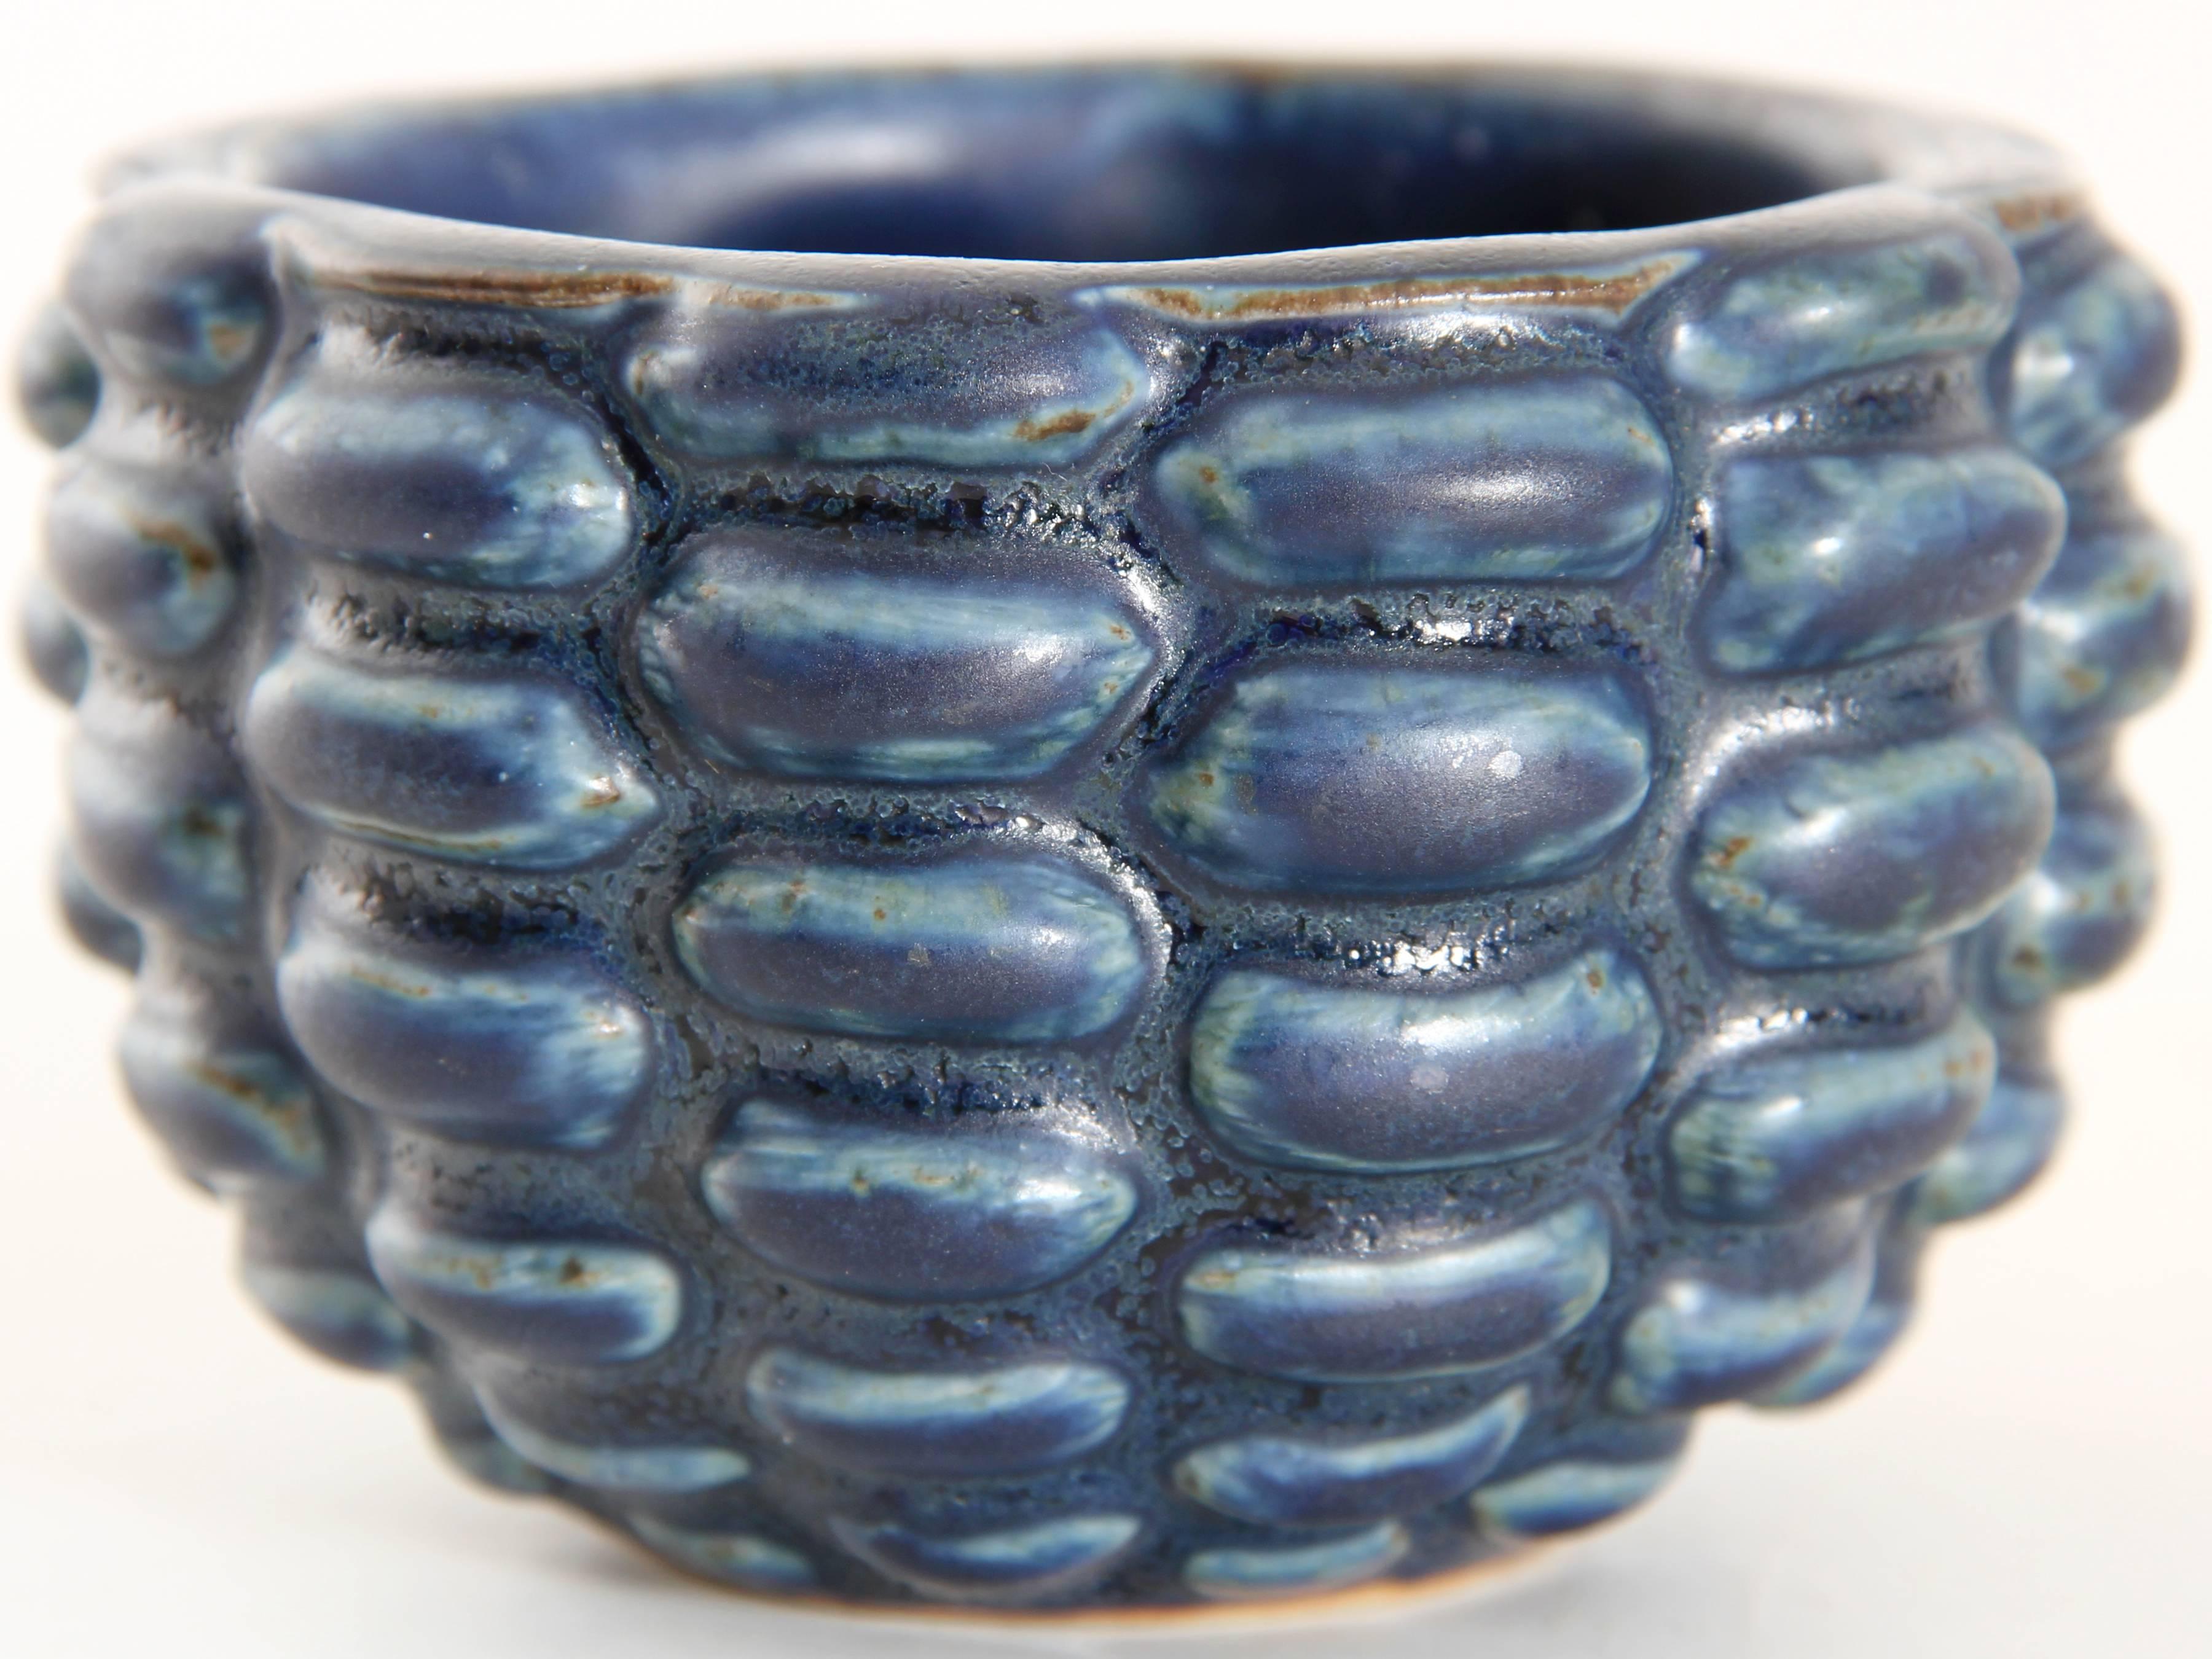 Rare. Small bowl of reasons "Budding" or bud Axel Salto. Dark blue glaze. Dated 1935 and produced in his own studio.